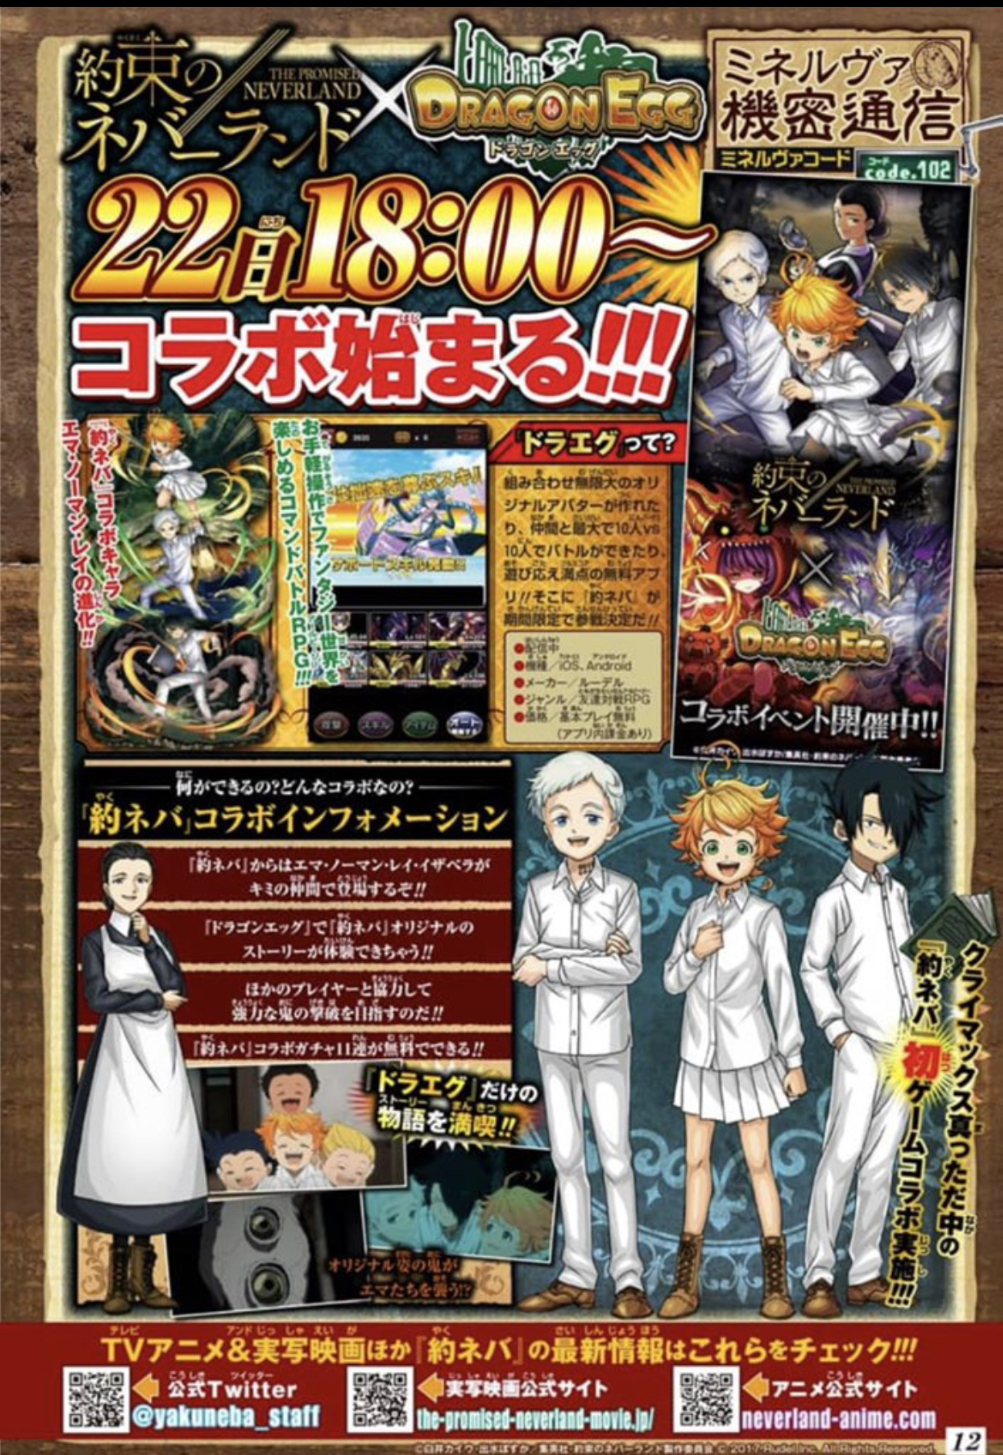 Qoo News] “Identity V” x “The Promised Neverland” Collaboration Starts Today